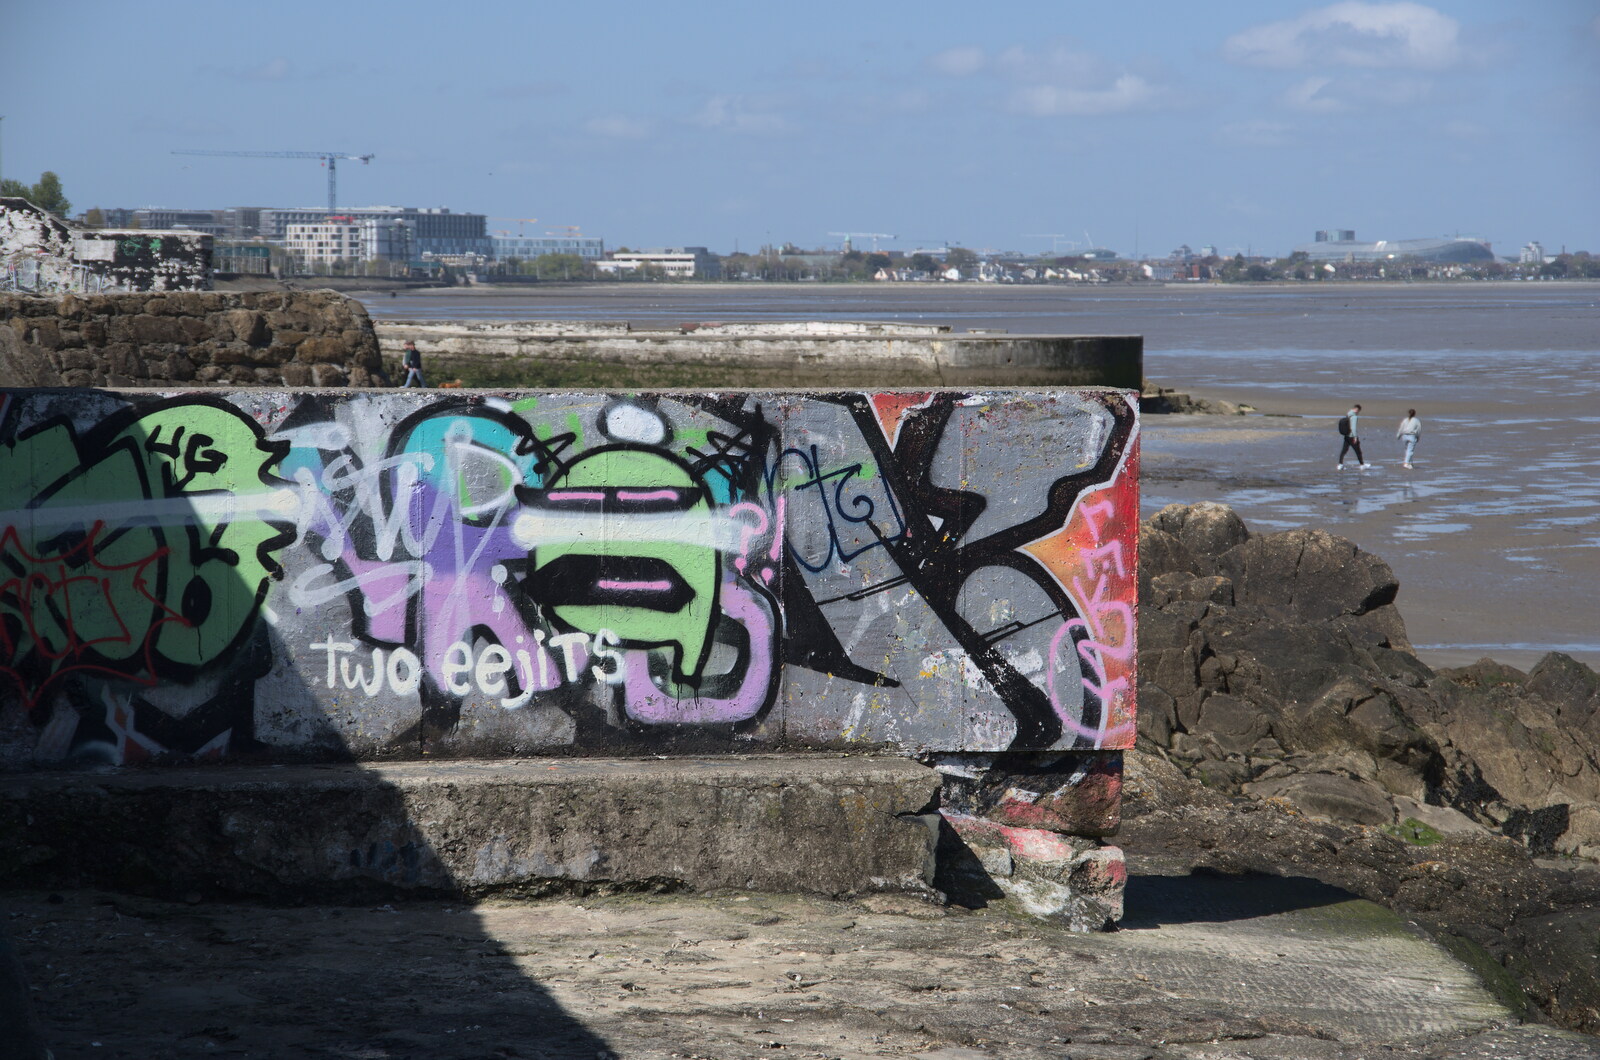 Blackrock North and South, Louth and County Dublin, Ireland - 23rd April 2022: A Two Eejits tag 